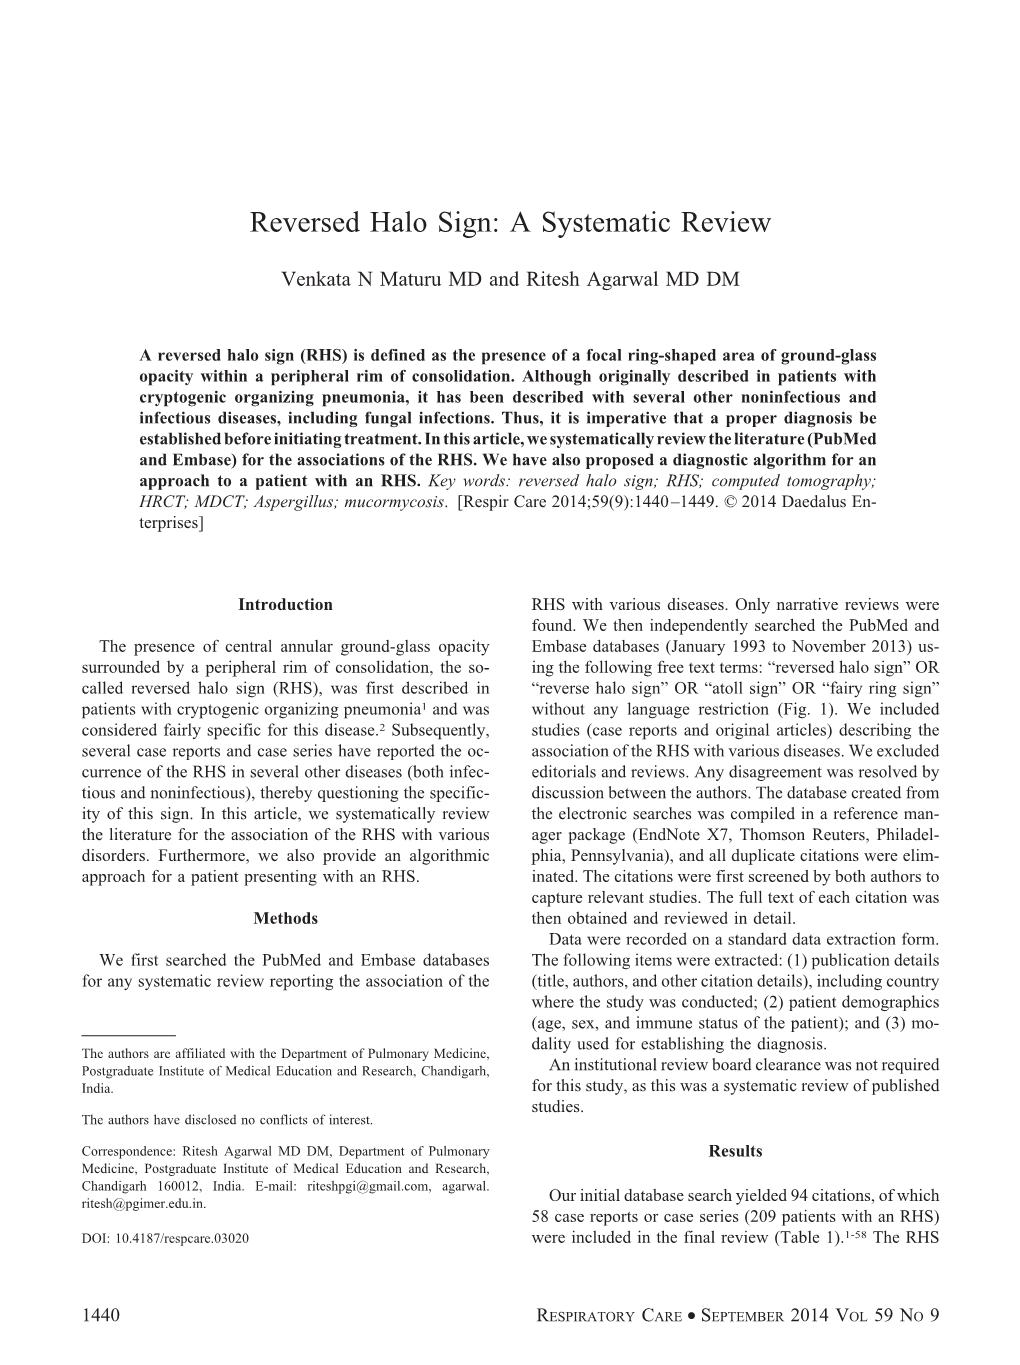 Reversed Halo Sign: a Systematic Review